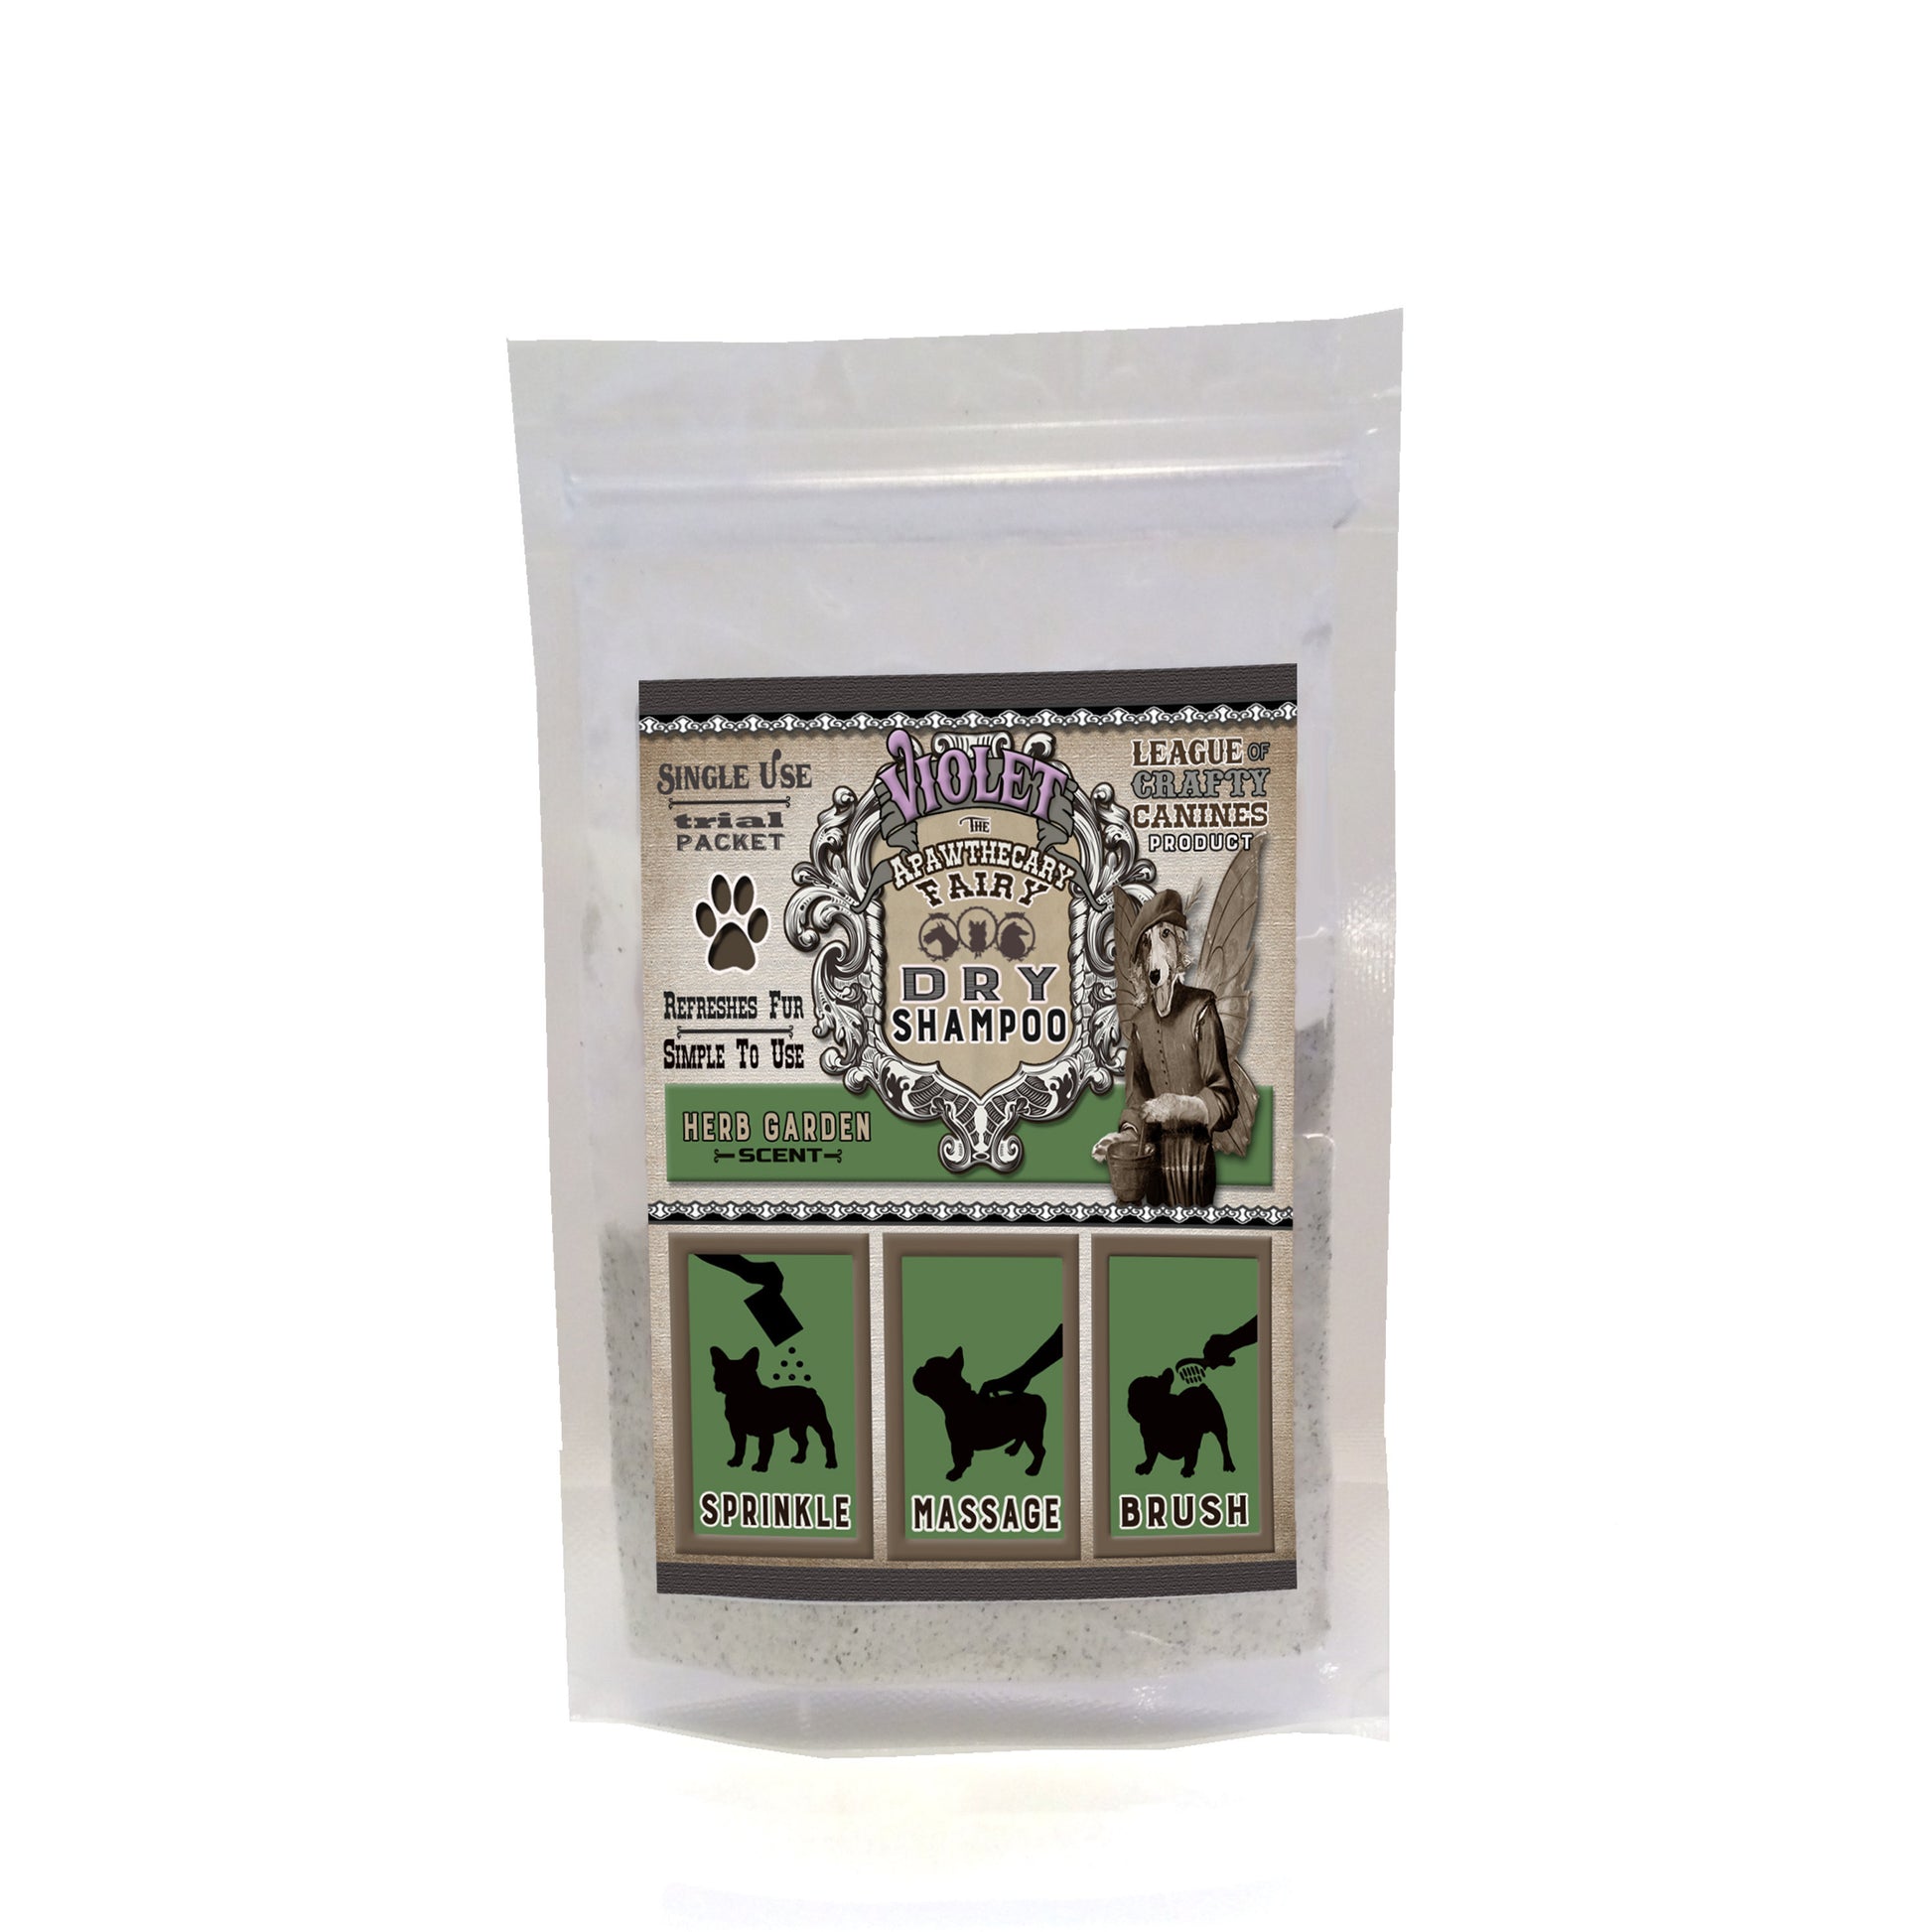 Violet the Apawthecary Fairy : (Herb Garden Scented) Dry Shampoo For Dogs! Trial Size - LEAGUE OF CRAFTY CANINES